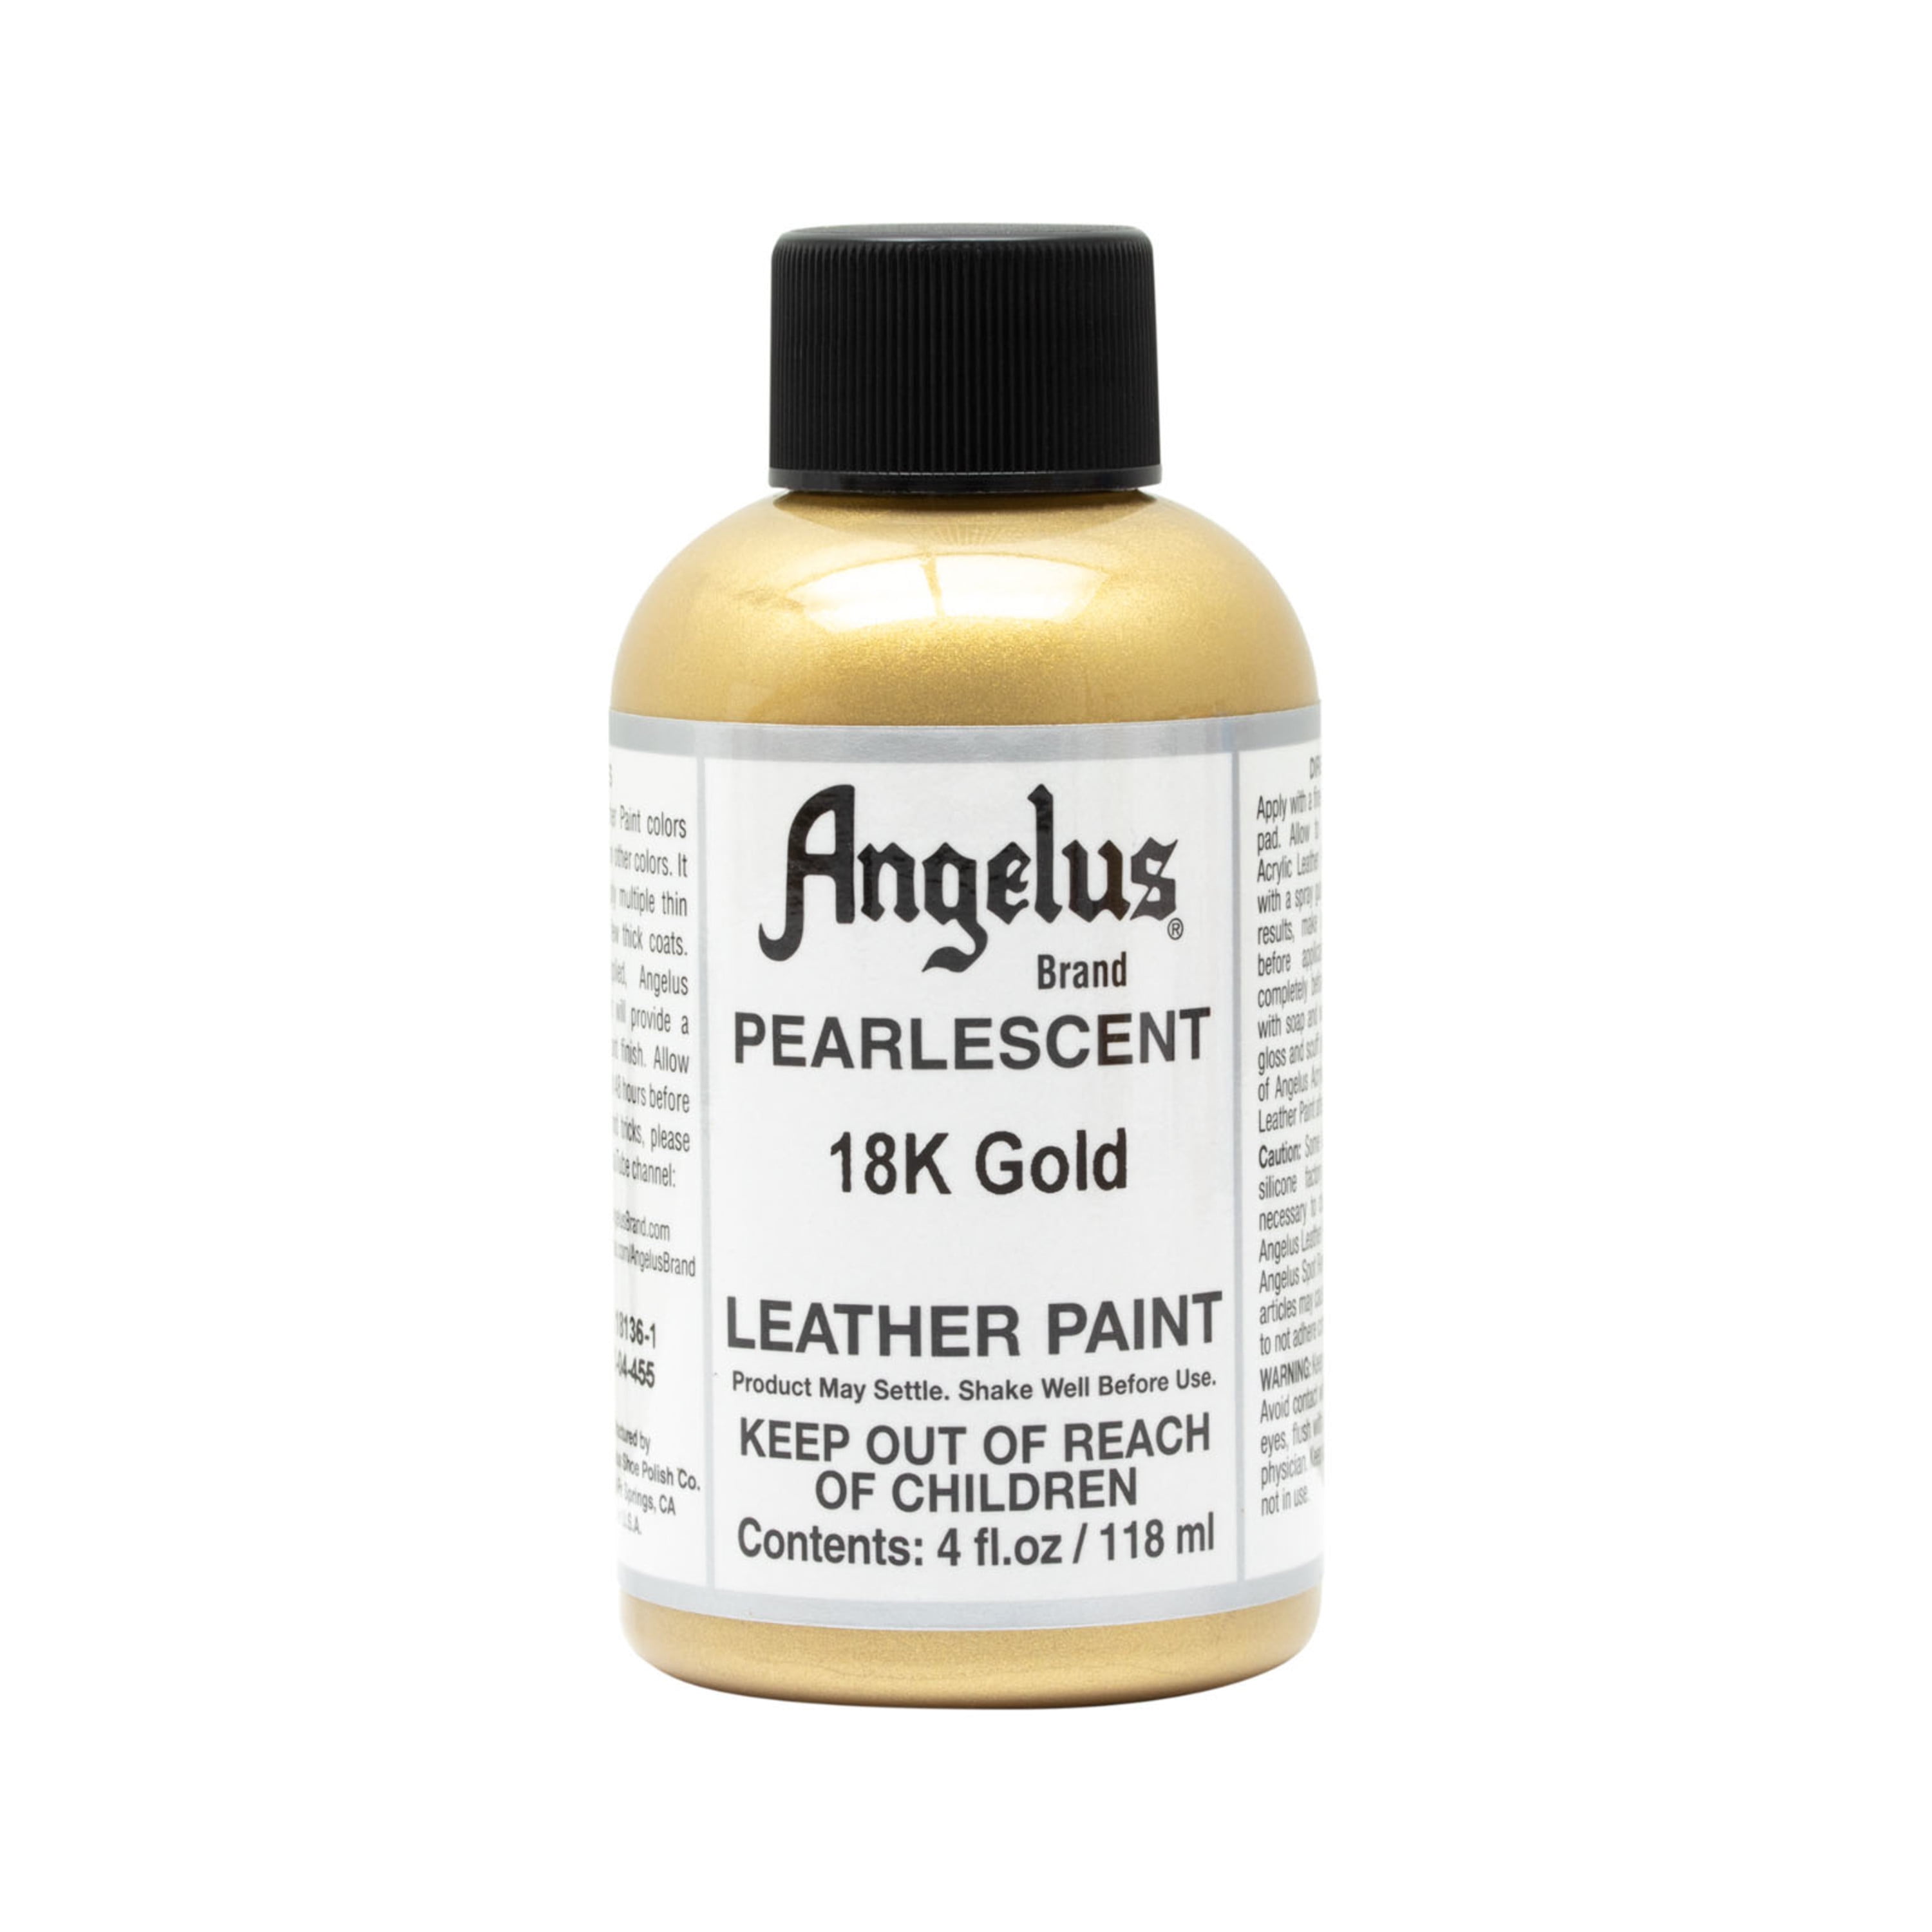 Angelus Leather Paint Pearlescent Sterling Silver, 4 oz